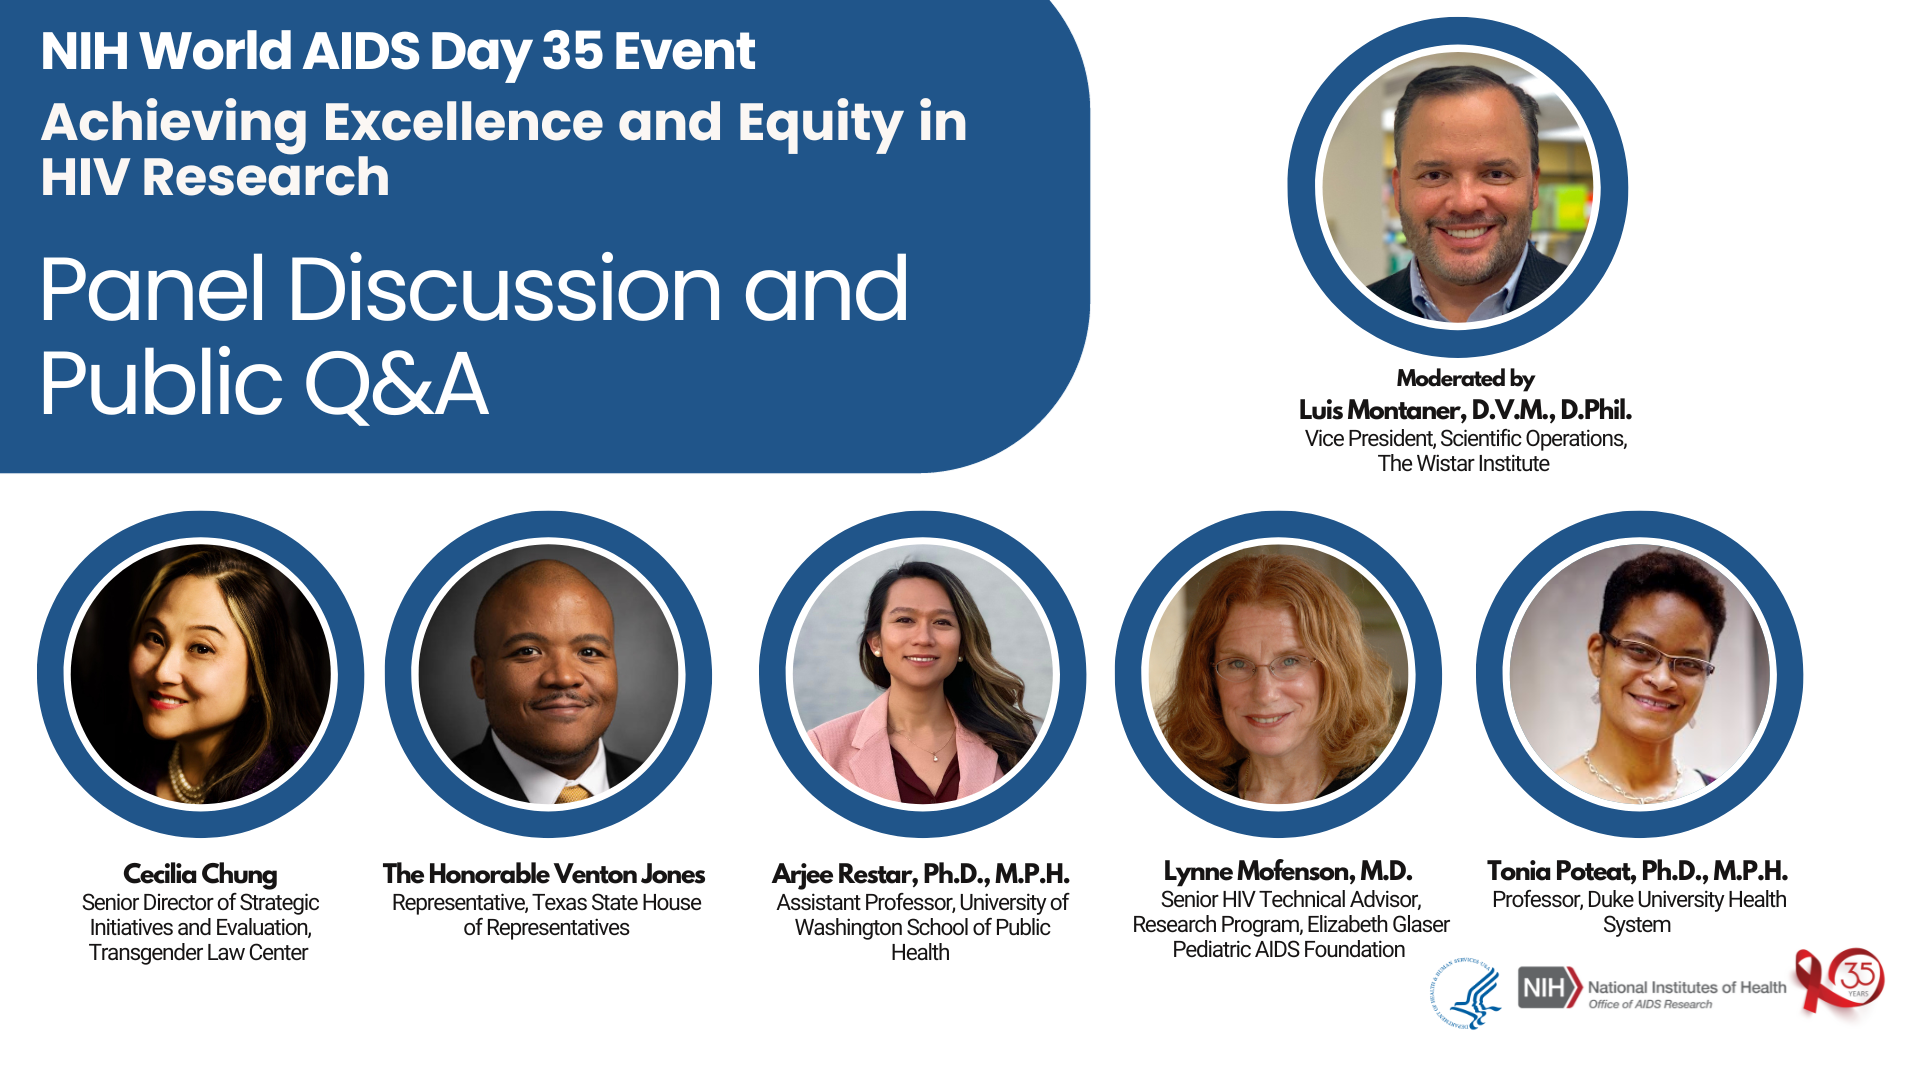 NIH World AIDS Day 35 Event: Achieving Excellence and Equity in HIV Research. Panel Discussion and Public Q&A